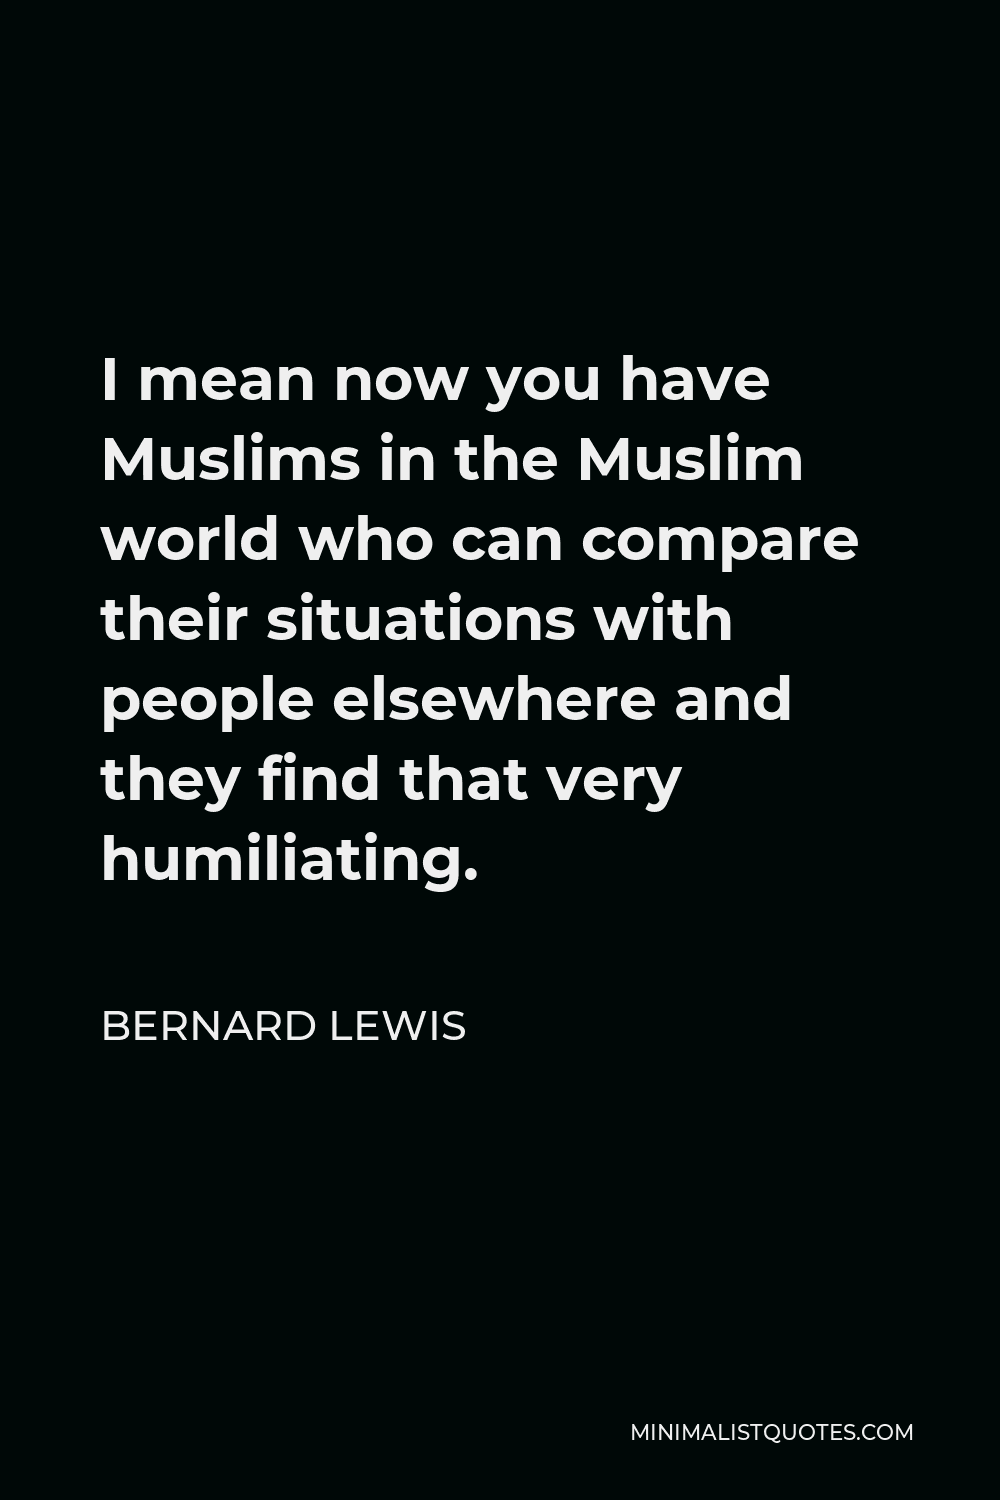 Bernard Lewis Quote - I mean now you have Muslims in the Muslim world who can compare their situations with people elsewhere and they find that very humiliating.